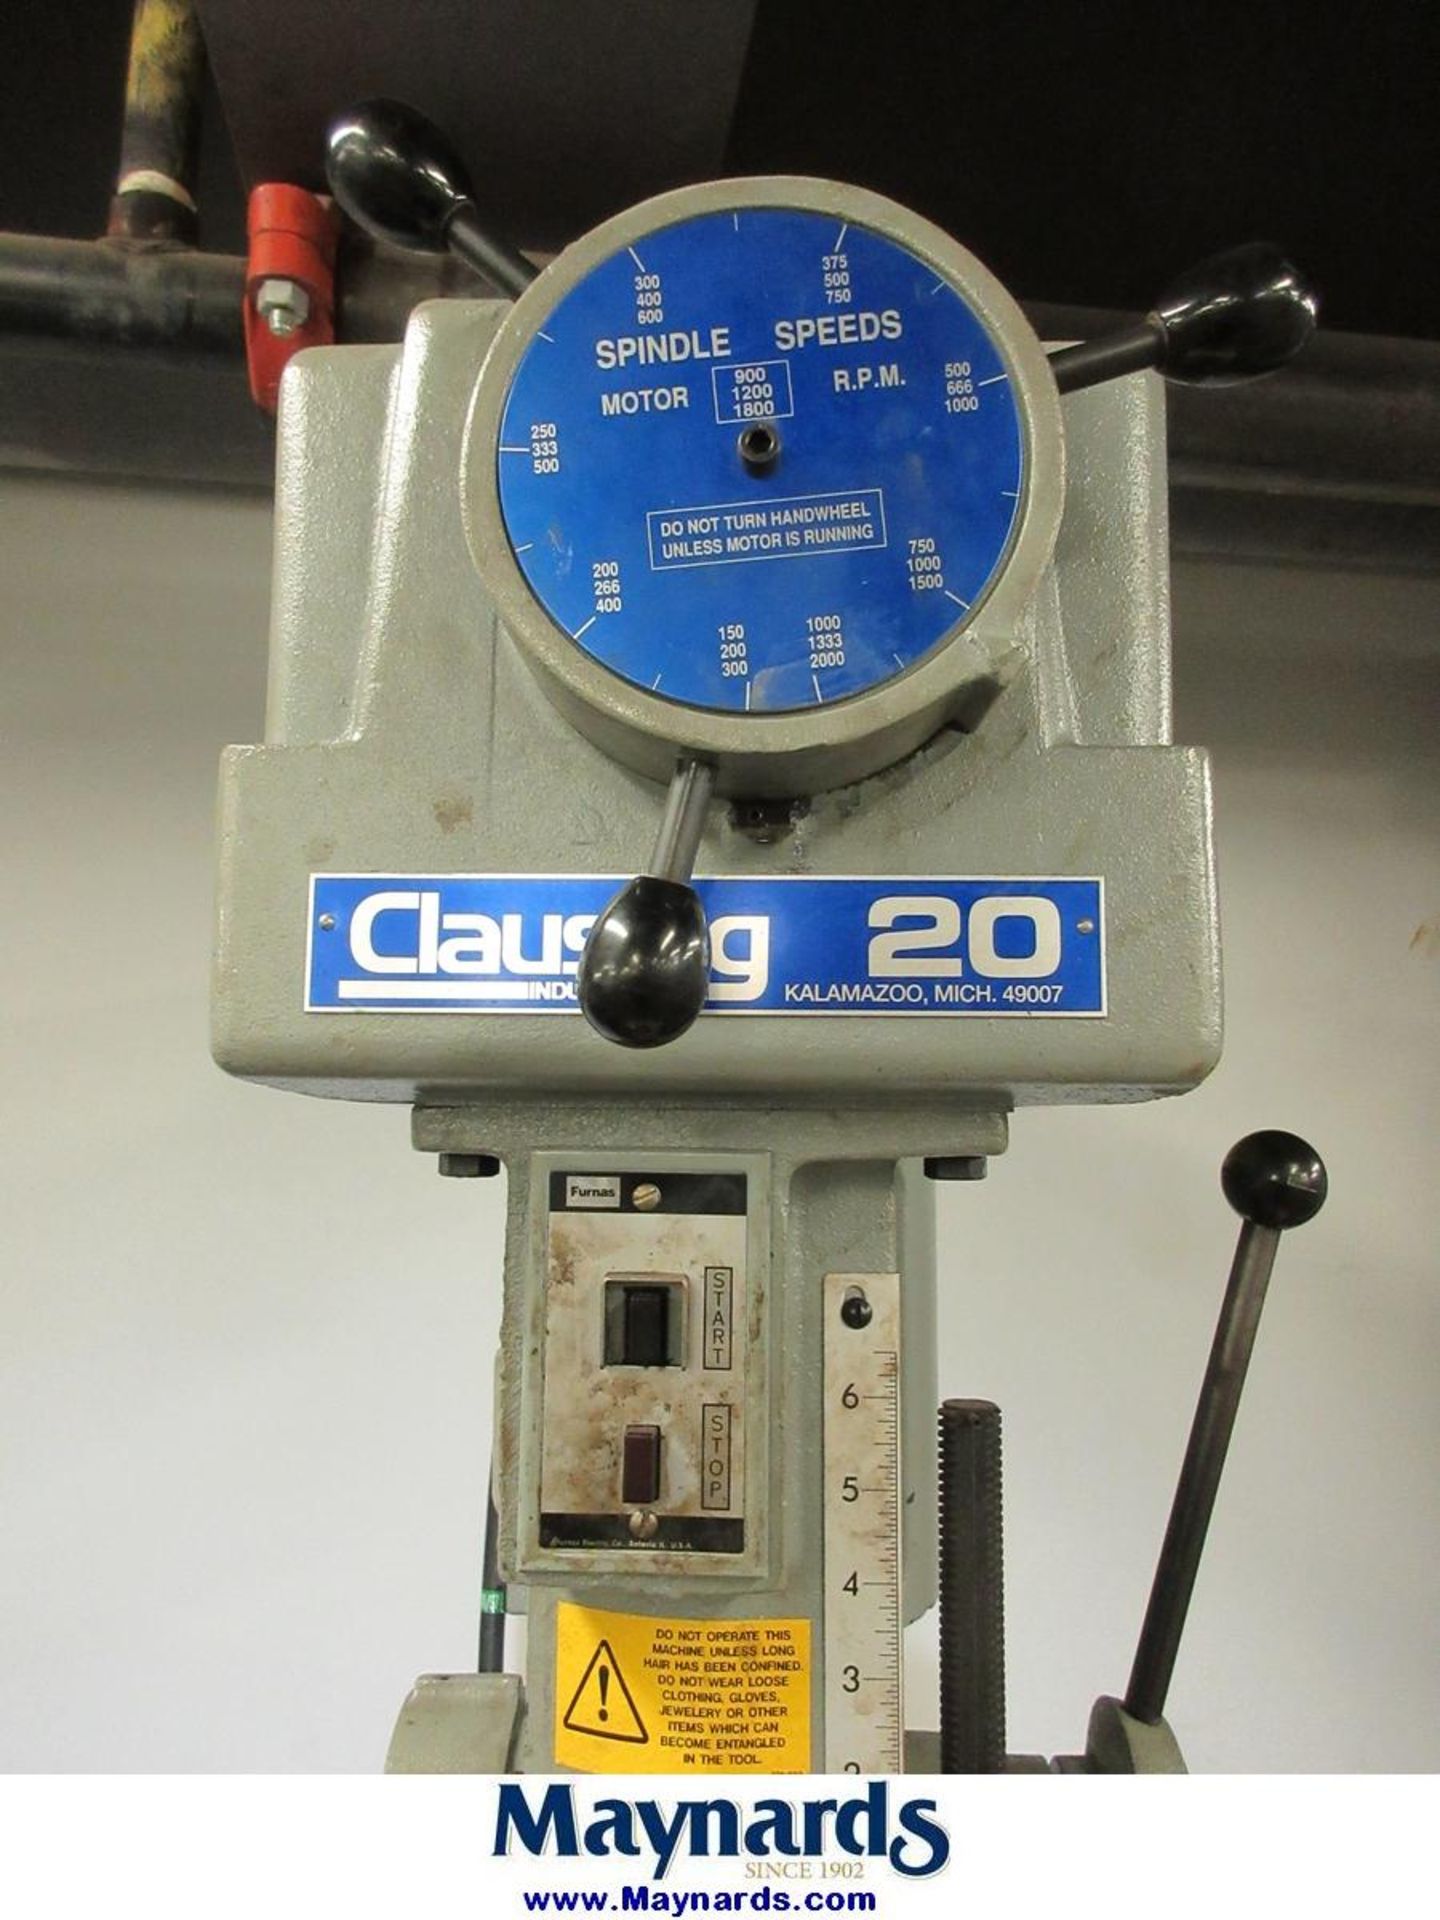 Clausing 2272 20" Variable Speed Floor Mounted Drill Press - Image 4 of 6